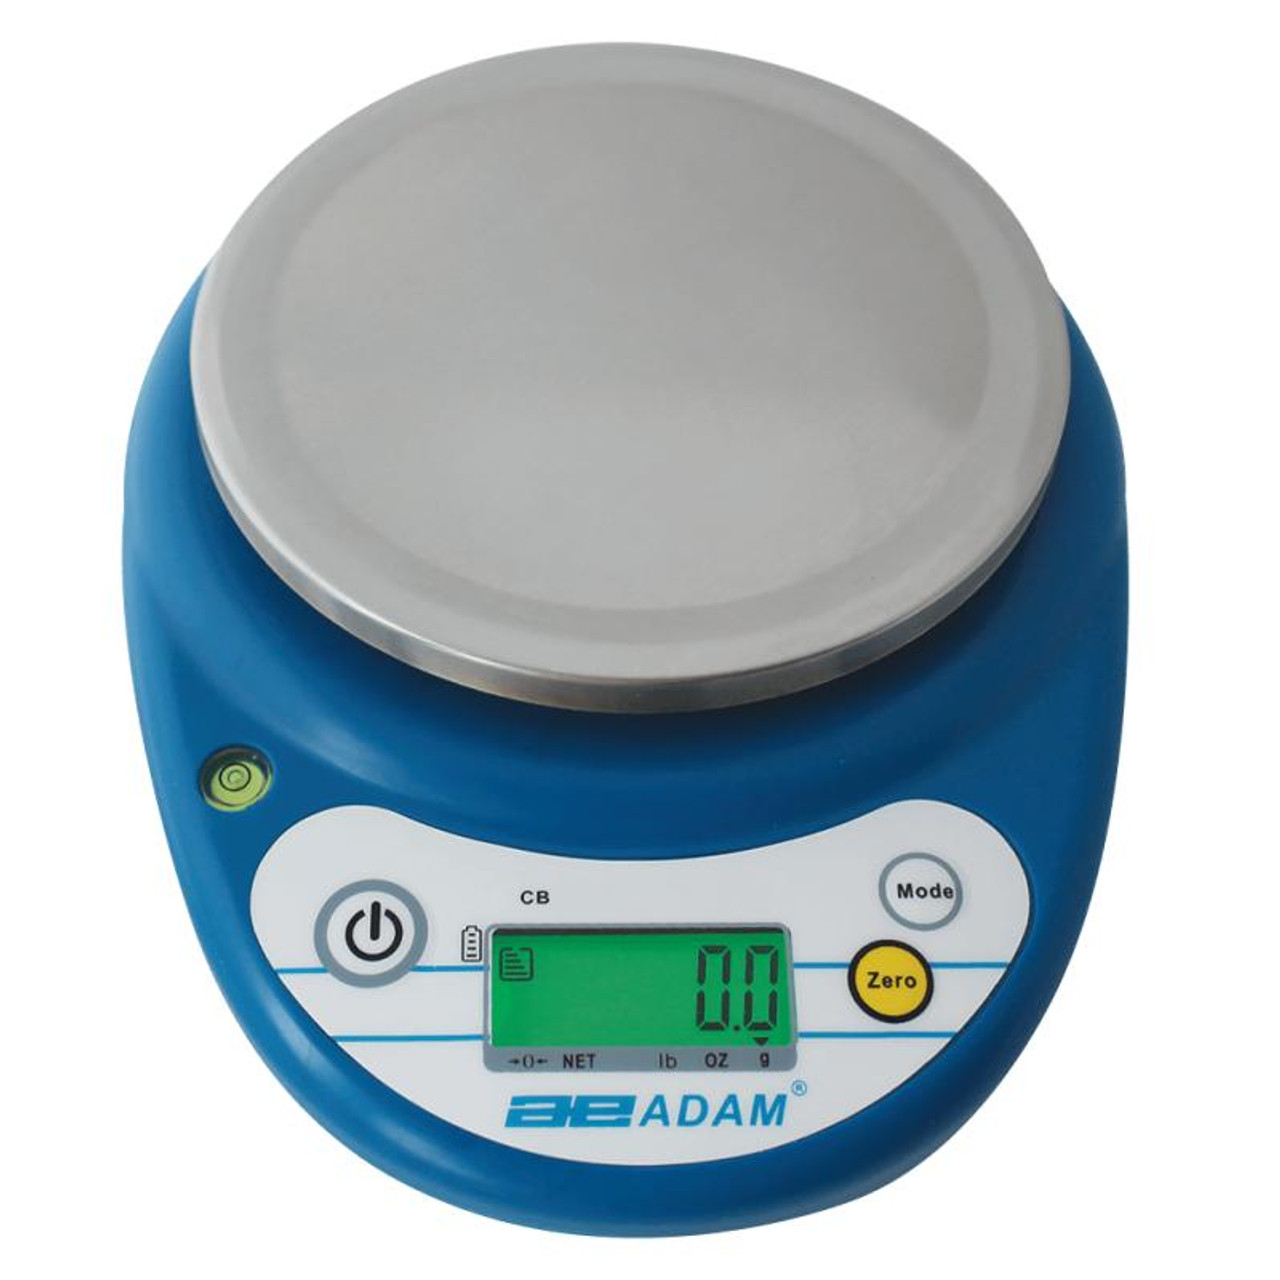 Laboratory & Industrial Weighing Scale Manufacturer - Adam Equipment USA